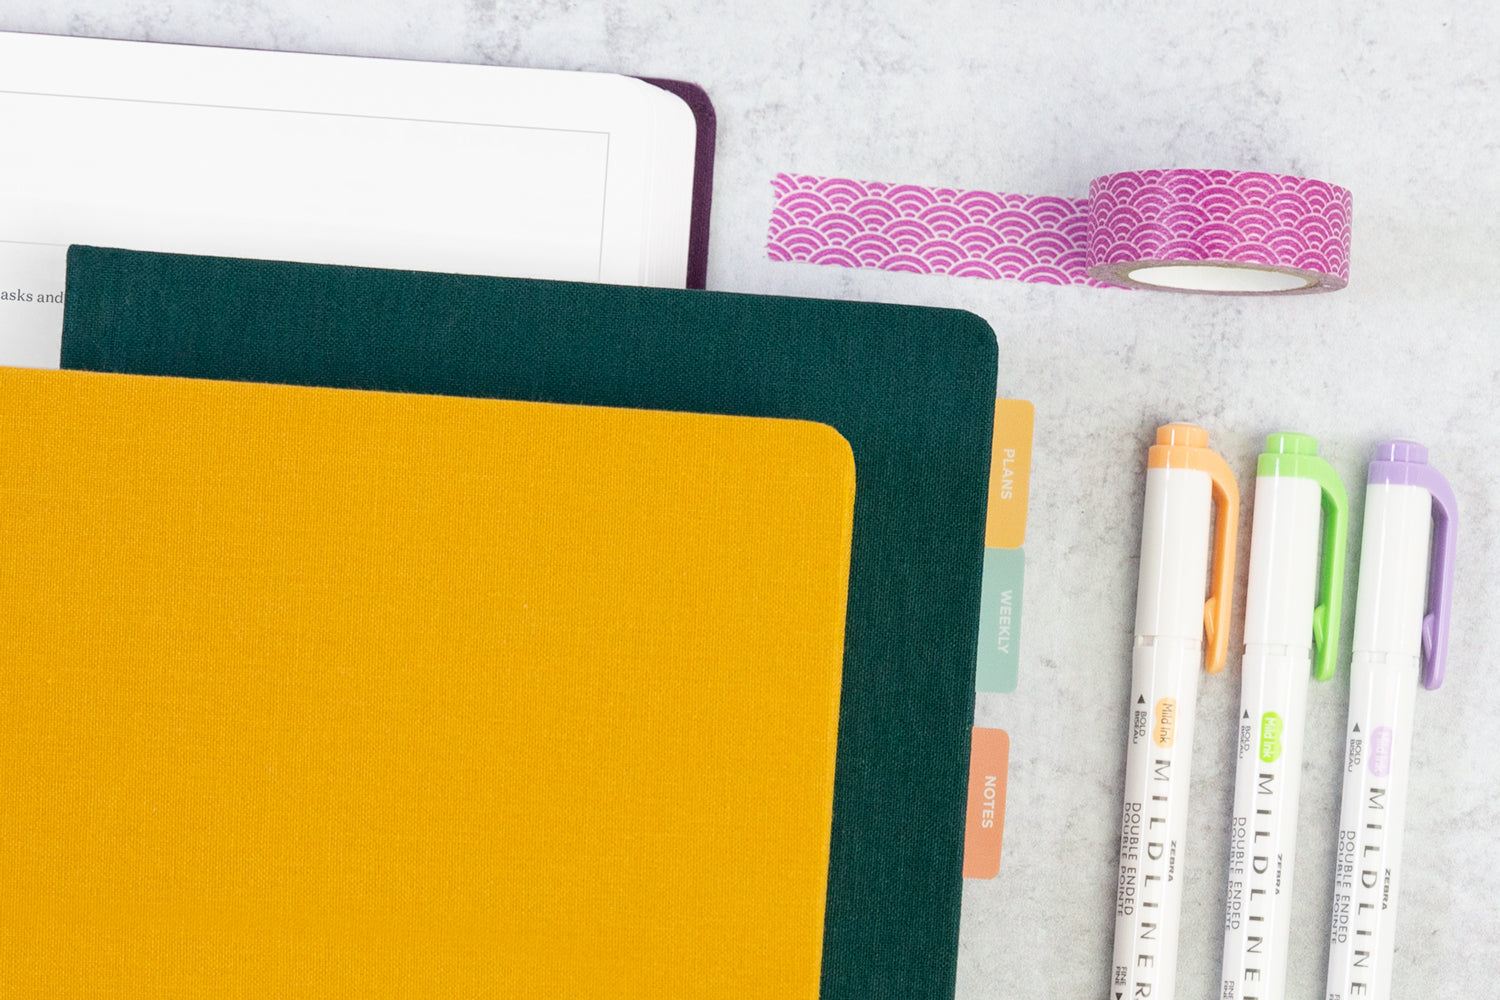 Three planners, stacked, on a white table, next to 3 colorful markers and a strip of pink tape.